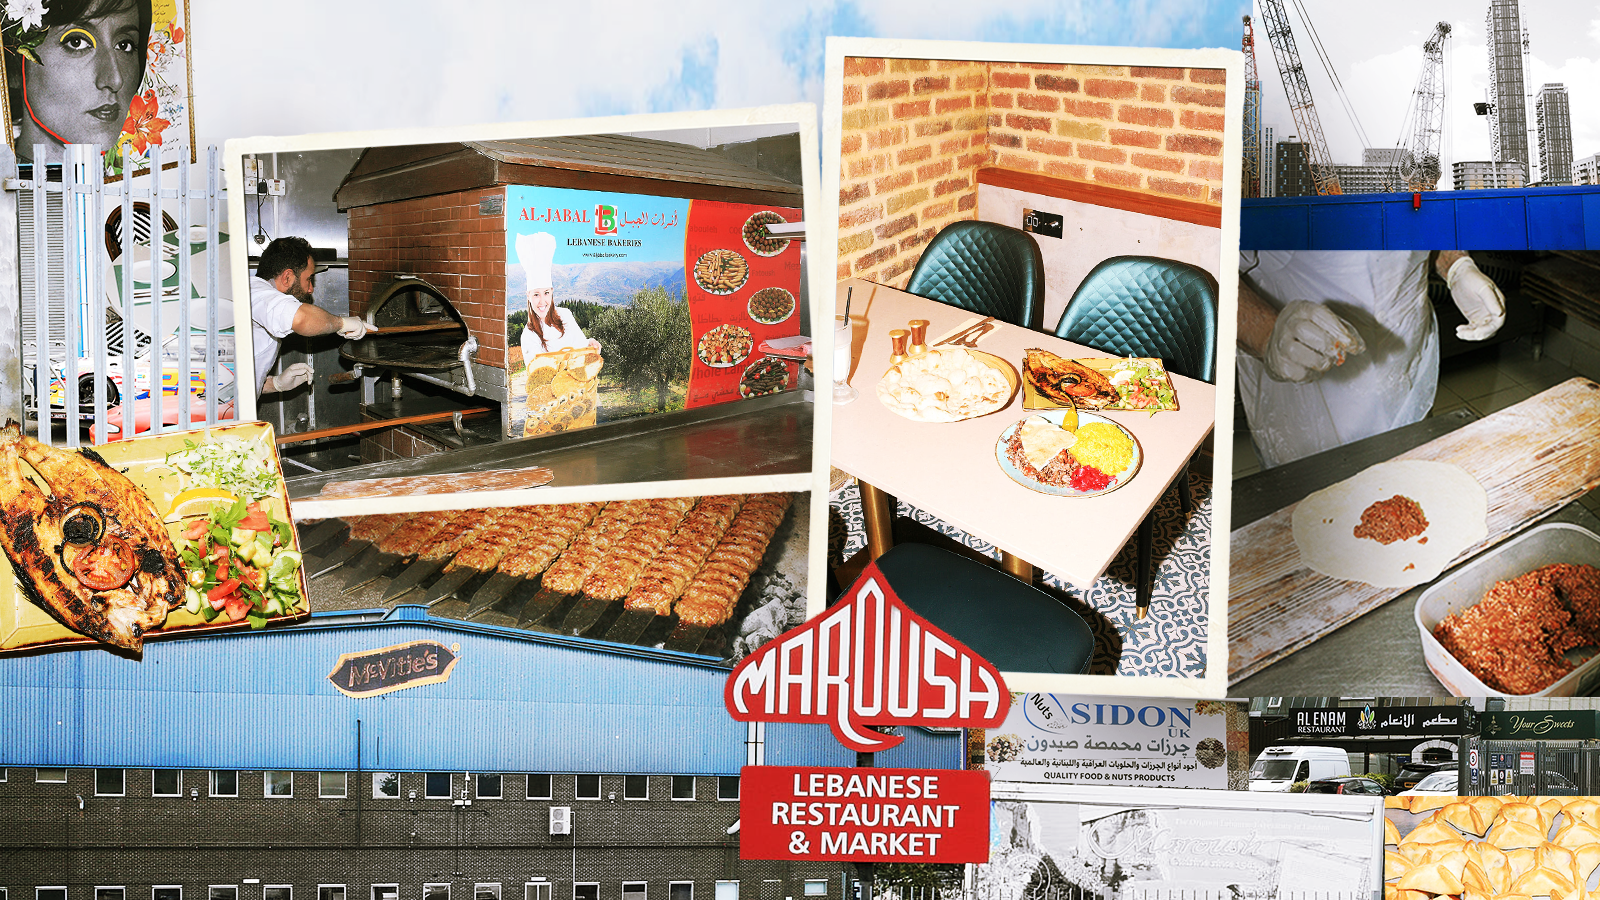 Photo-collage of several scenes depicted postcard-style: a man reaching into an oven, a diner tabletop, and two hands assembling a dish.